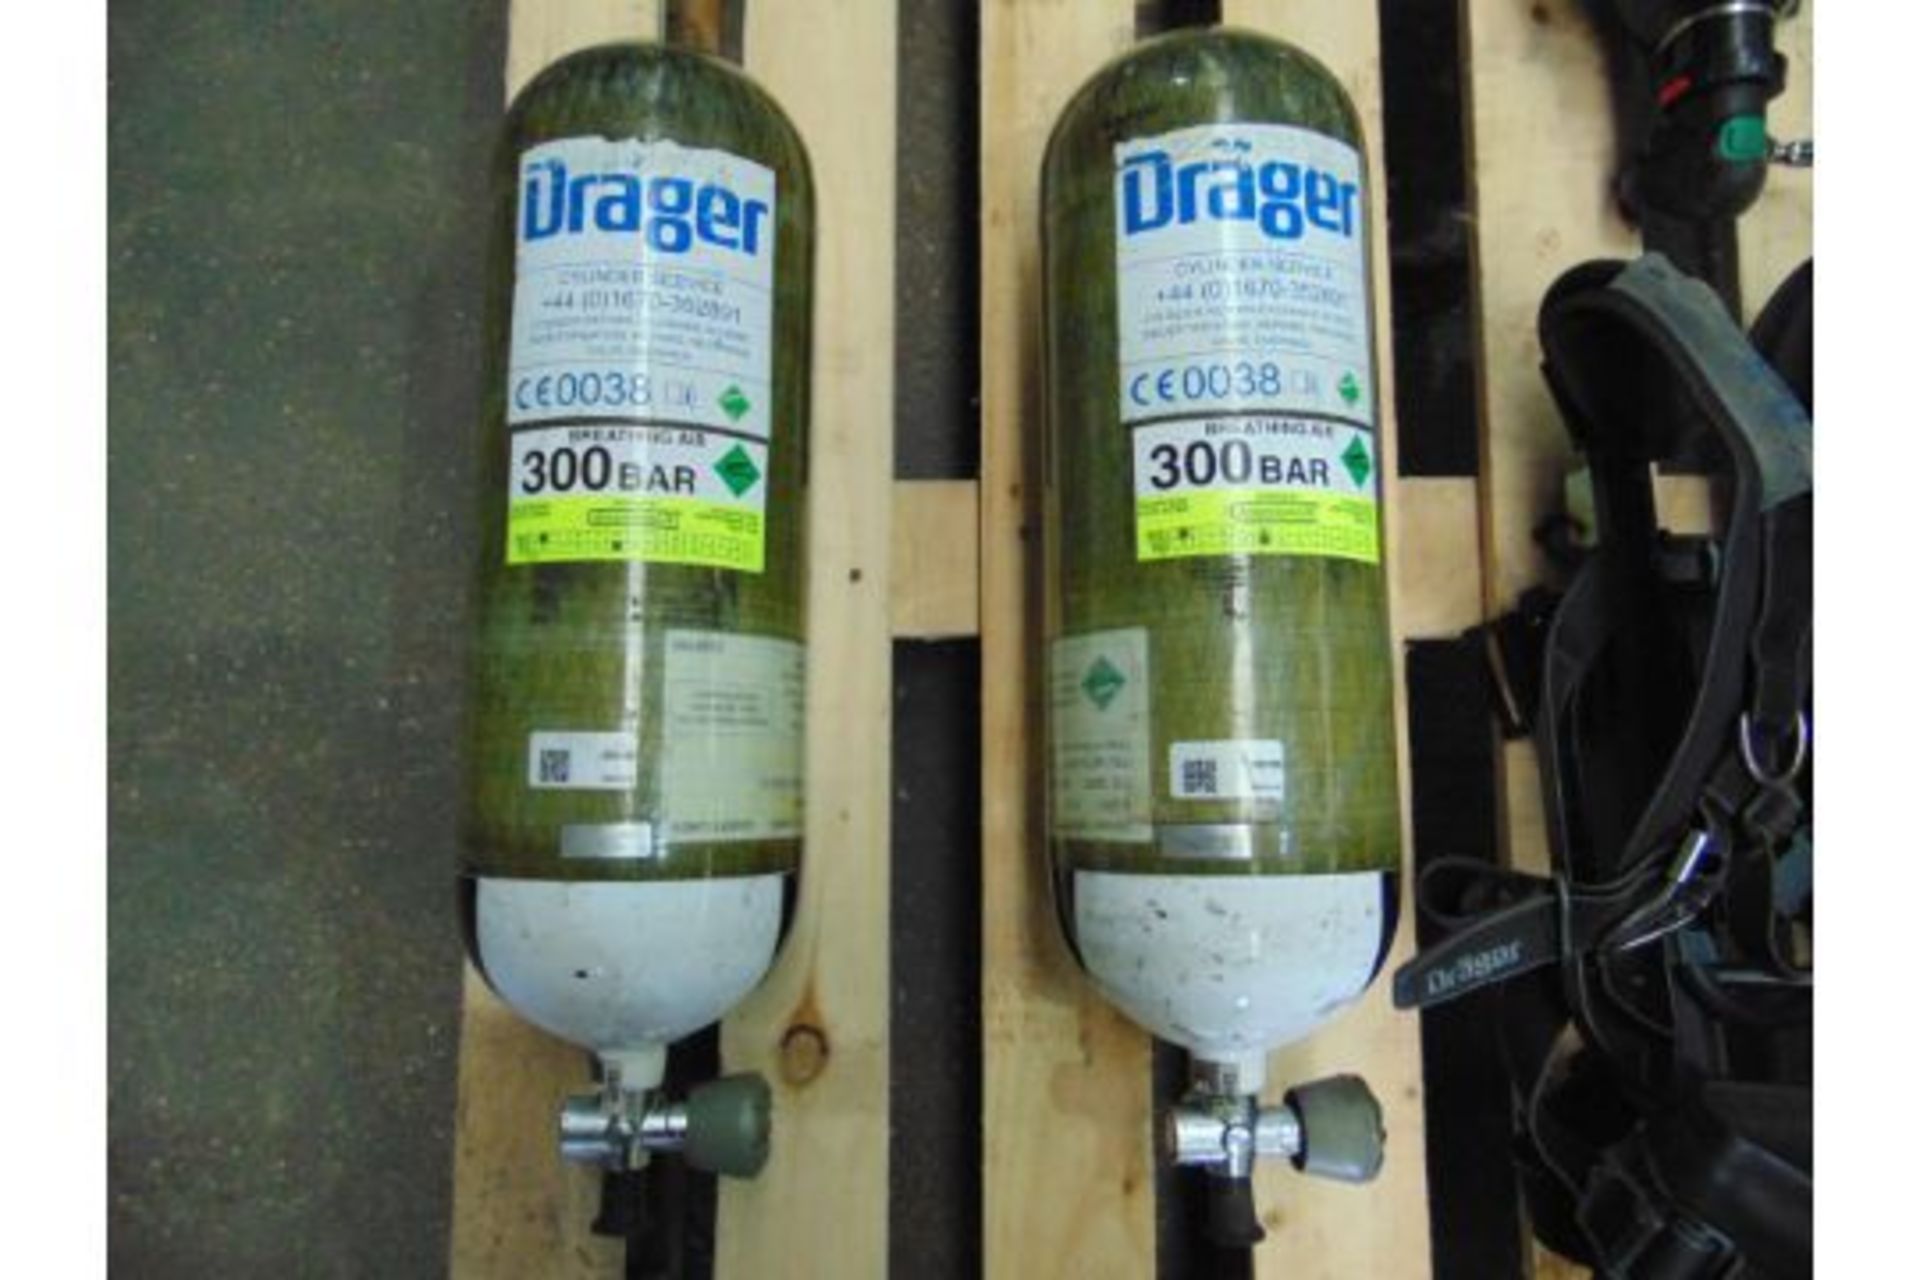 Drager PSS 7000 Self Contained Breathing Apparatus w/ 2 x Drager 300 Bar Air Cylinders - Image 3 of 22